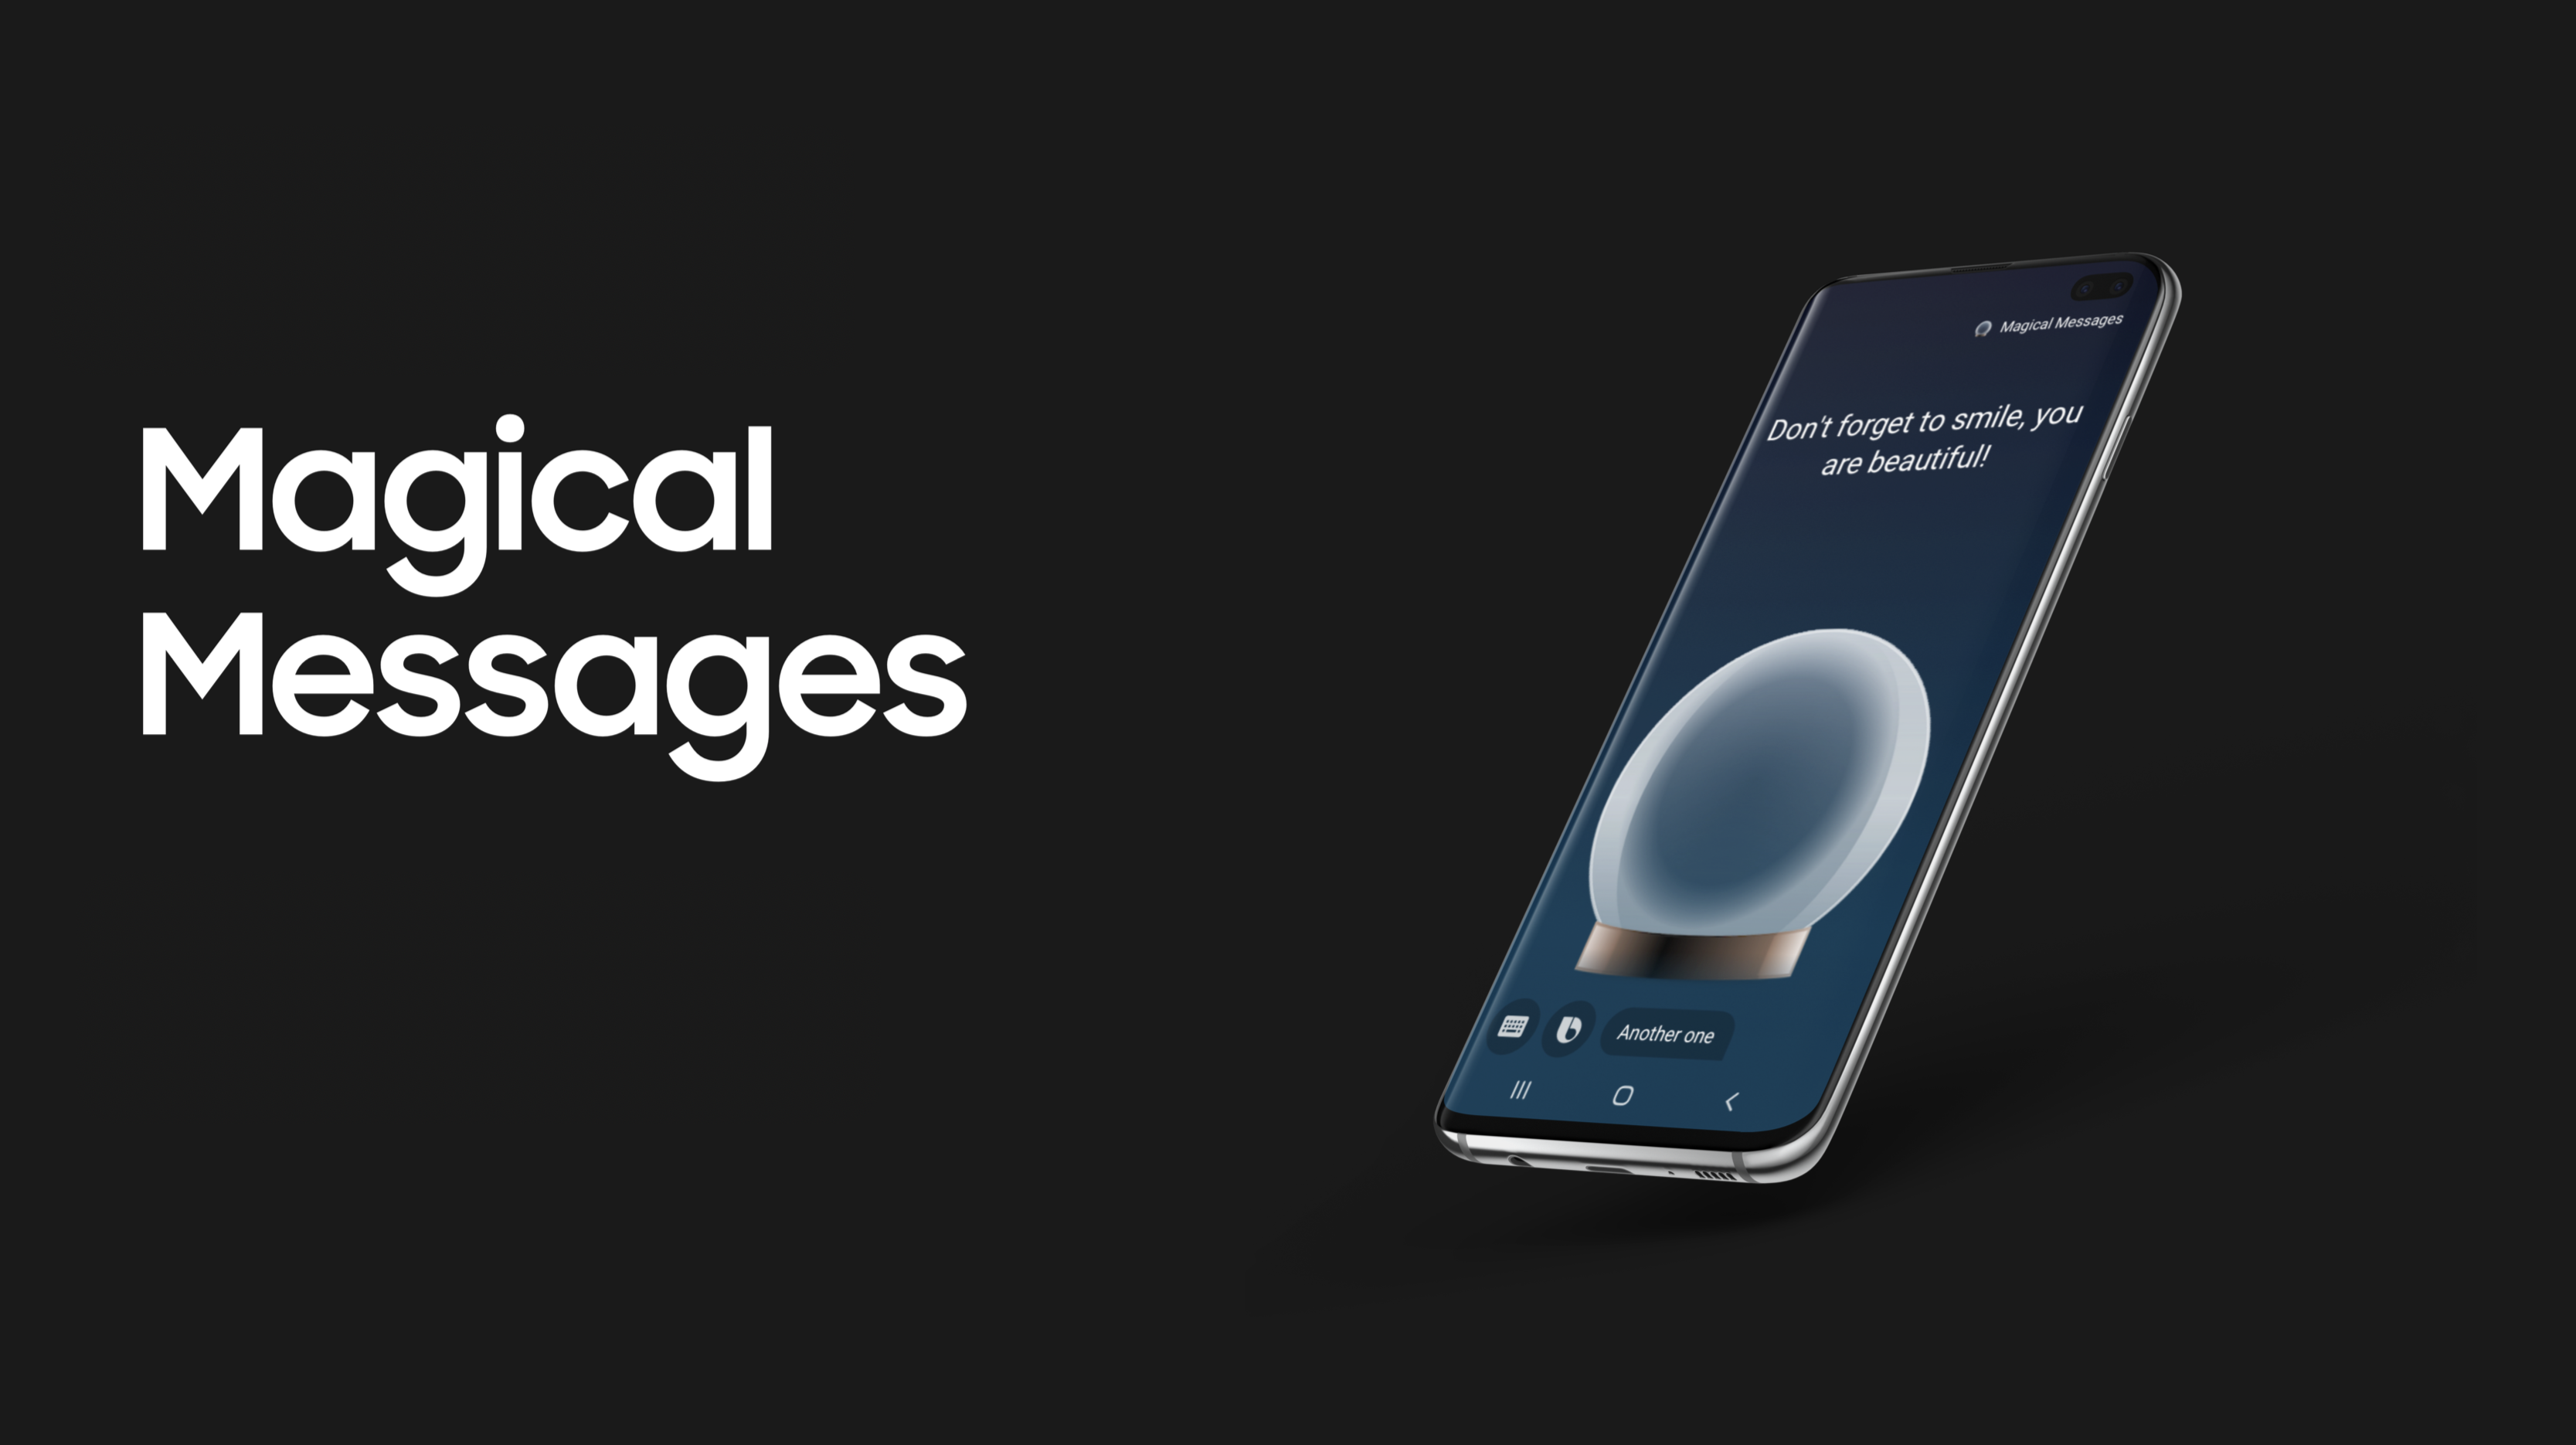 Magical Messages Bixby capsule